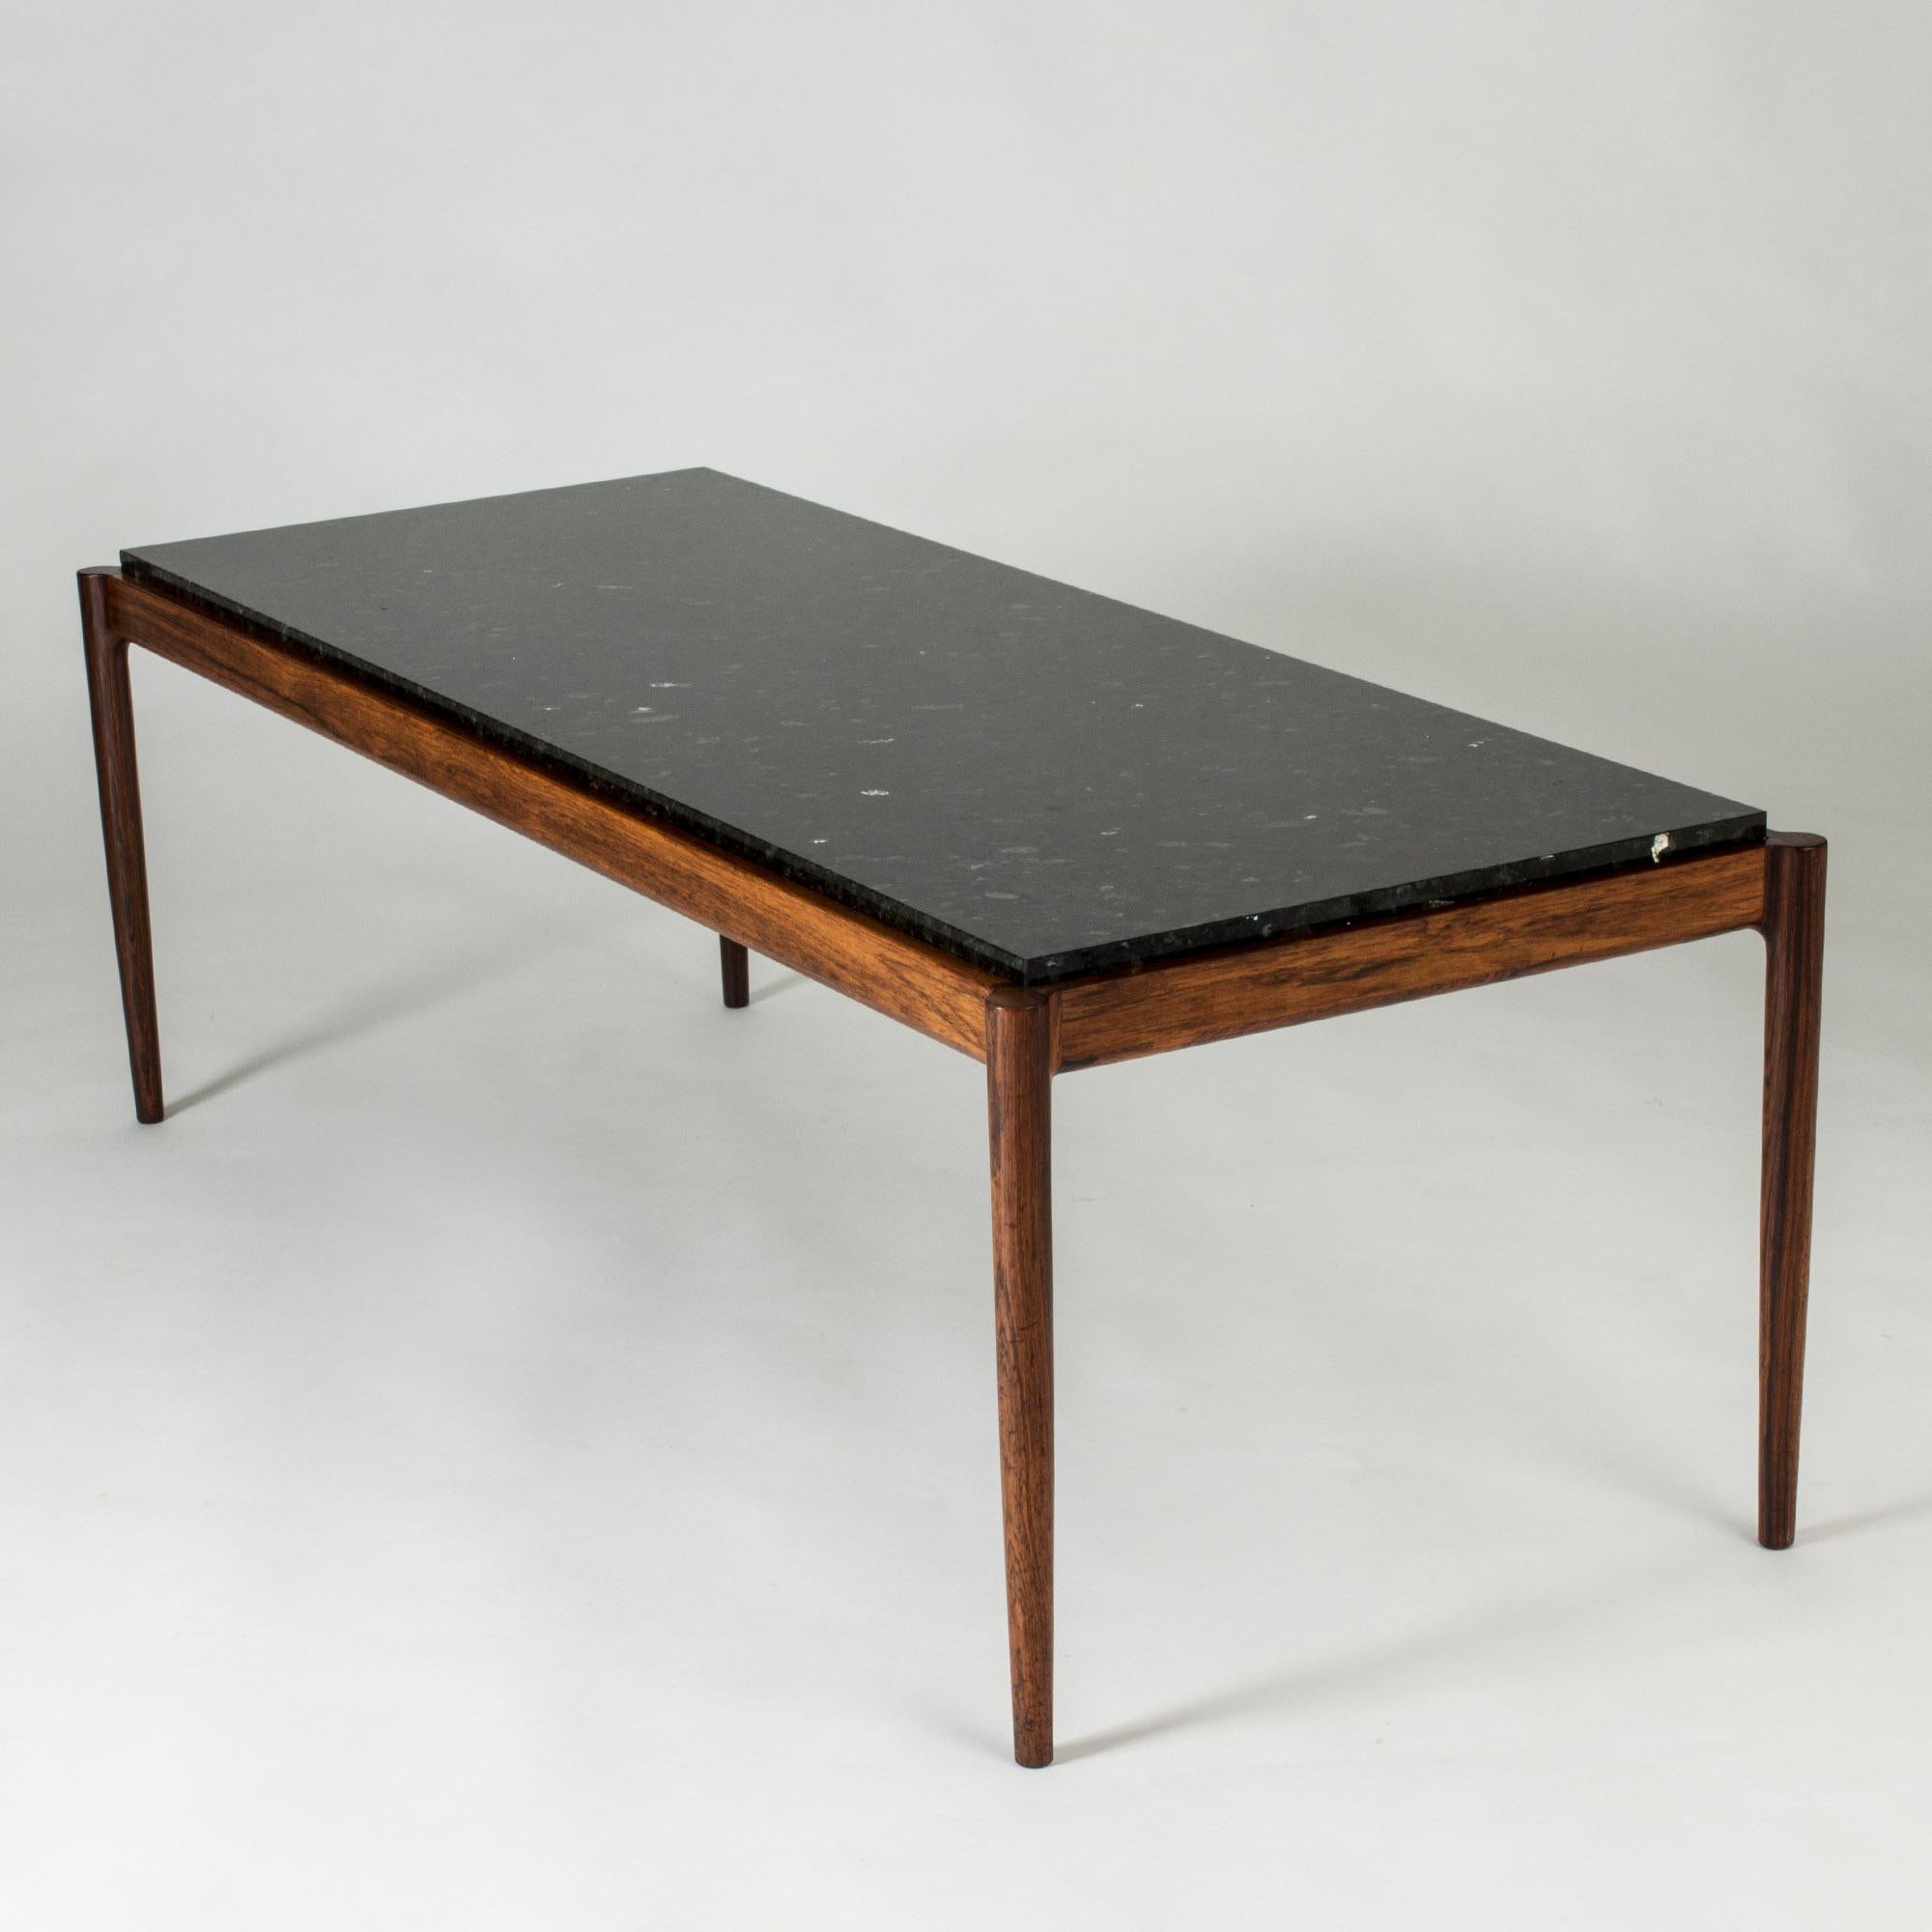 Elegant coffee table by Ib Kofod Larsen, with a rosewood frame and black marble table top. Smoothly rounded corners, subtle glimmer in the table top.